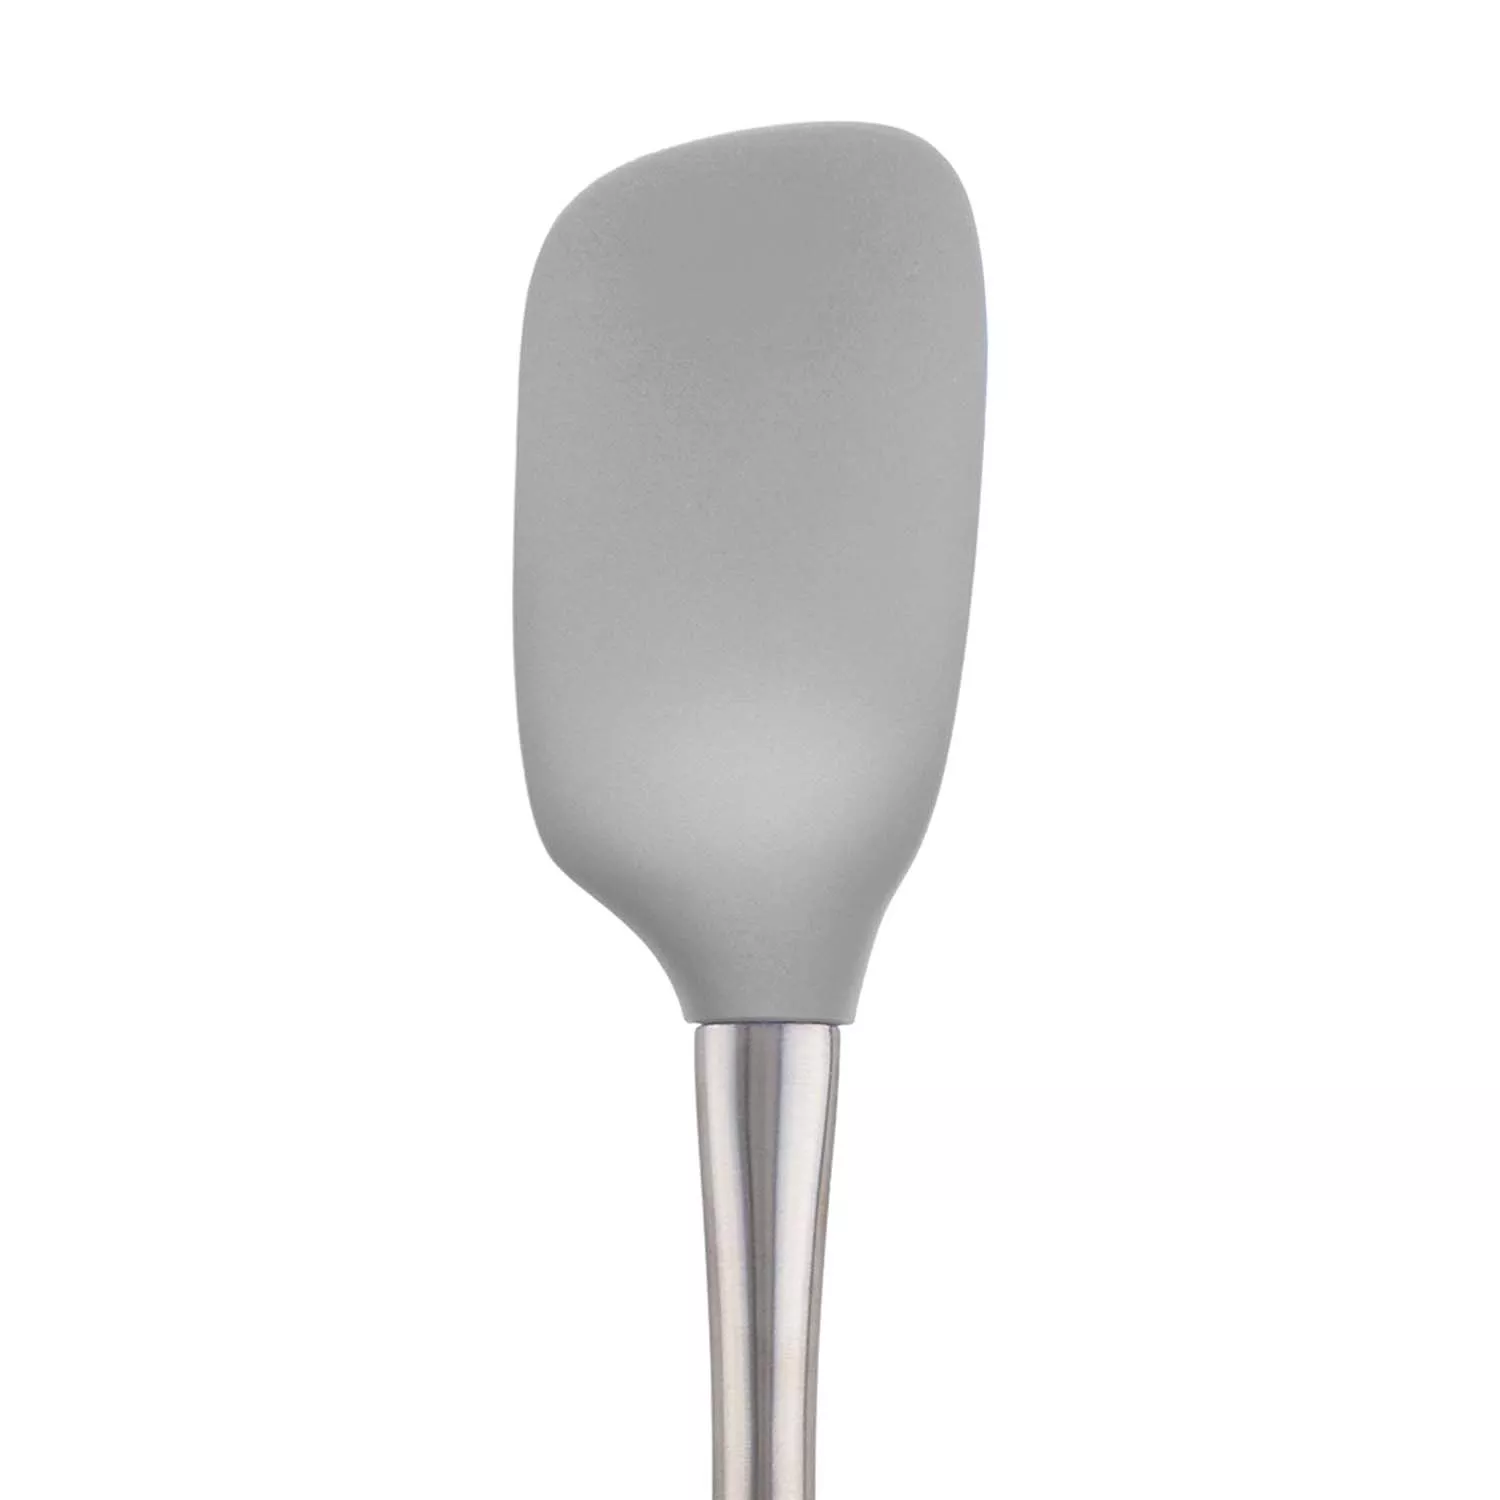 Sur La Table Flex-Core Silicone Spatula Spoon with Stainless Steel